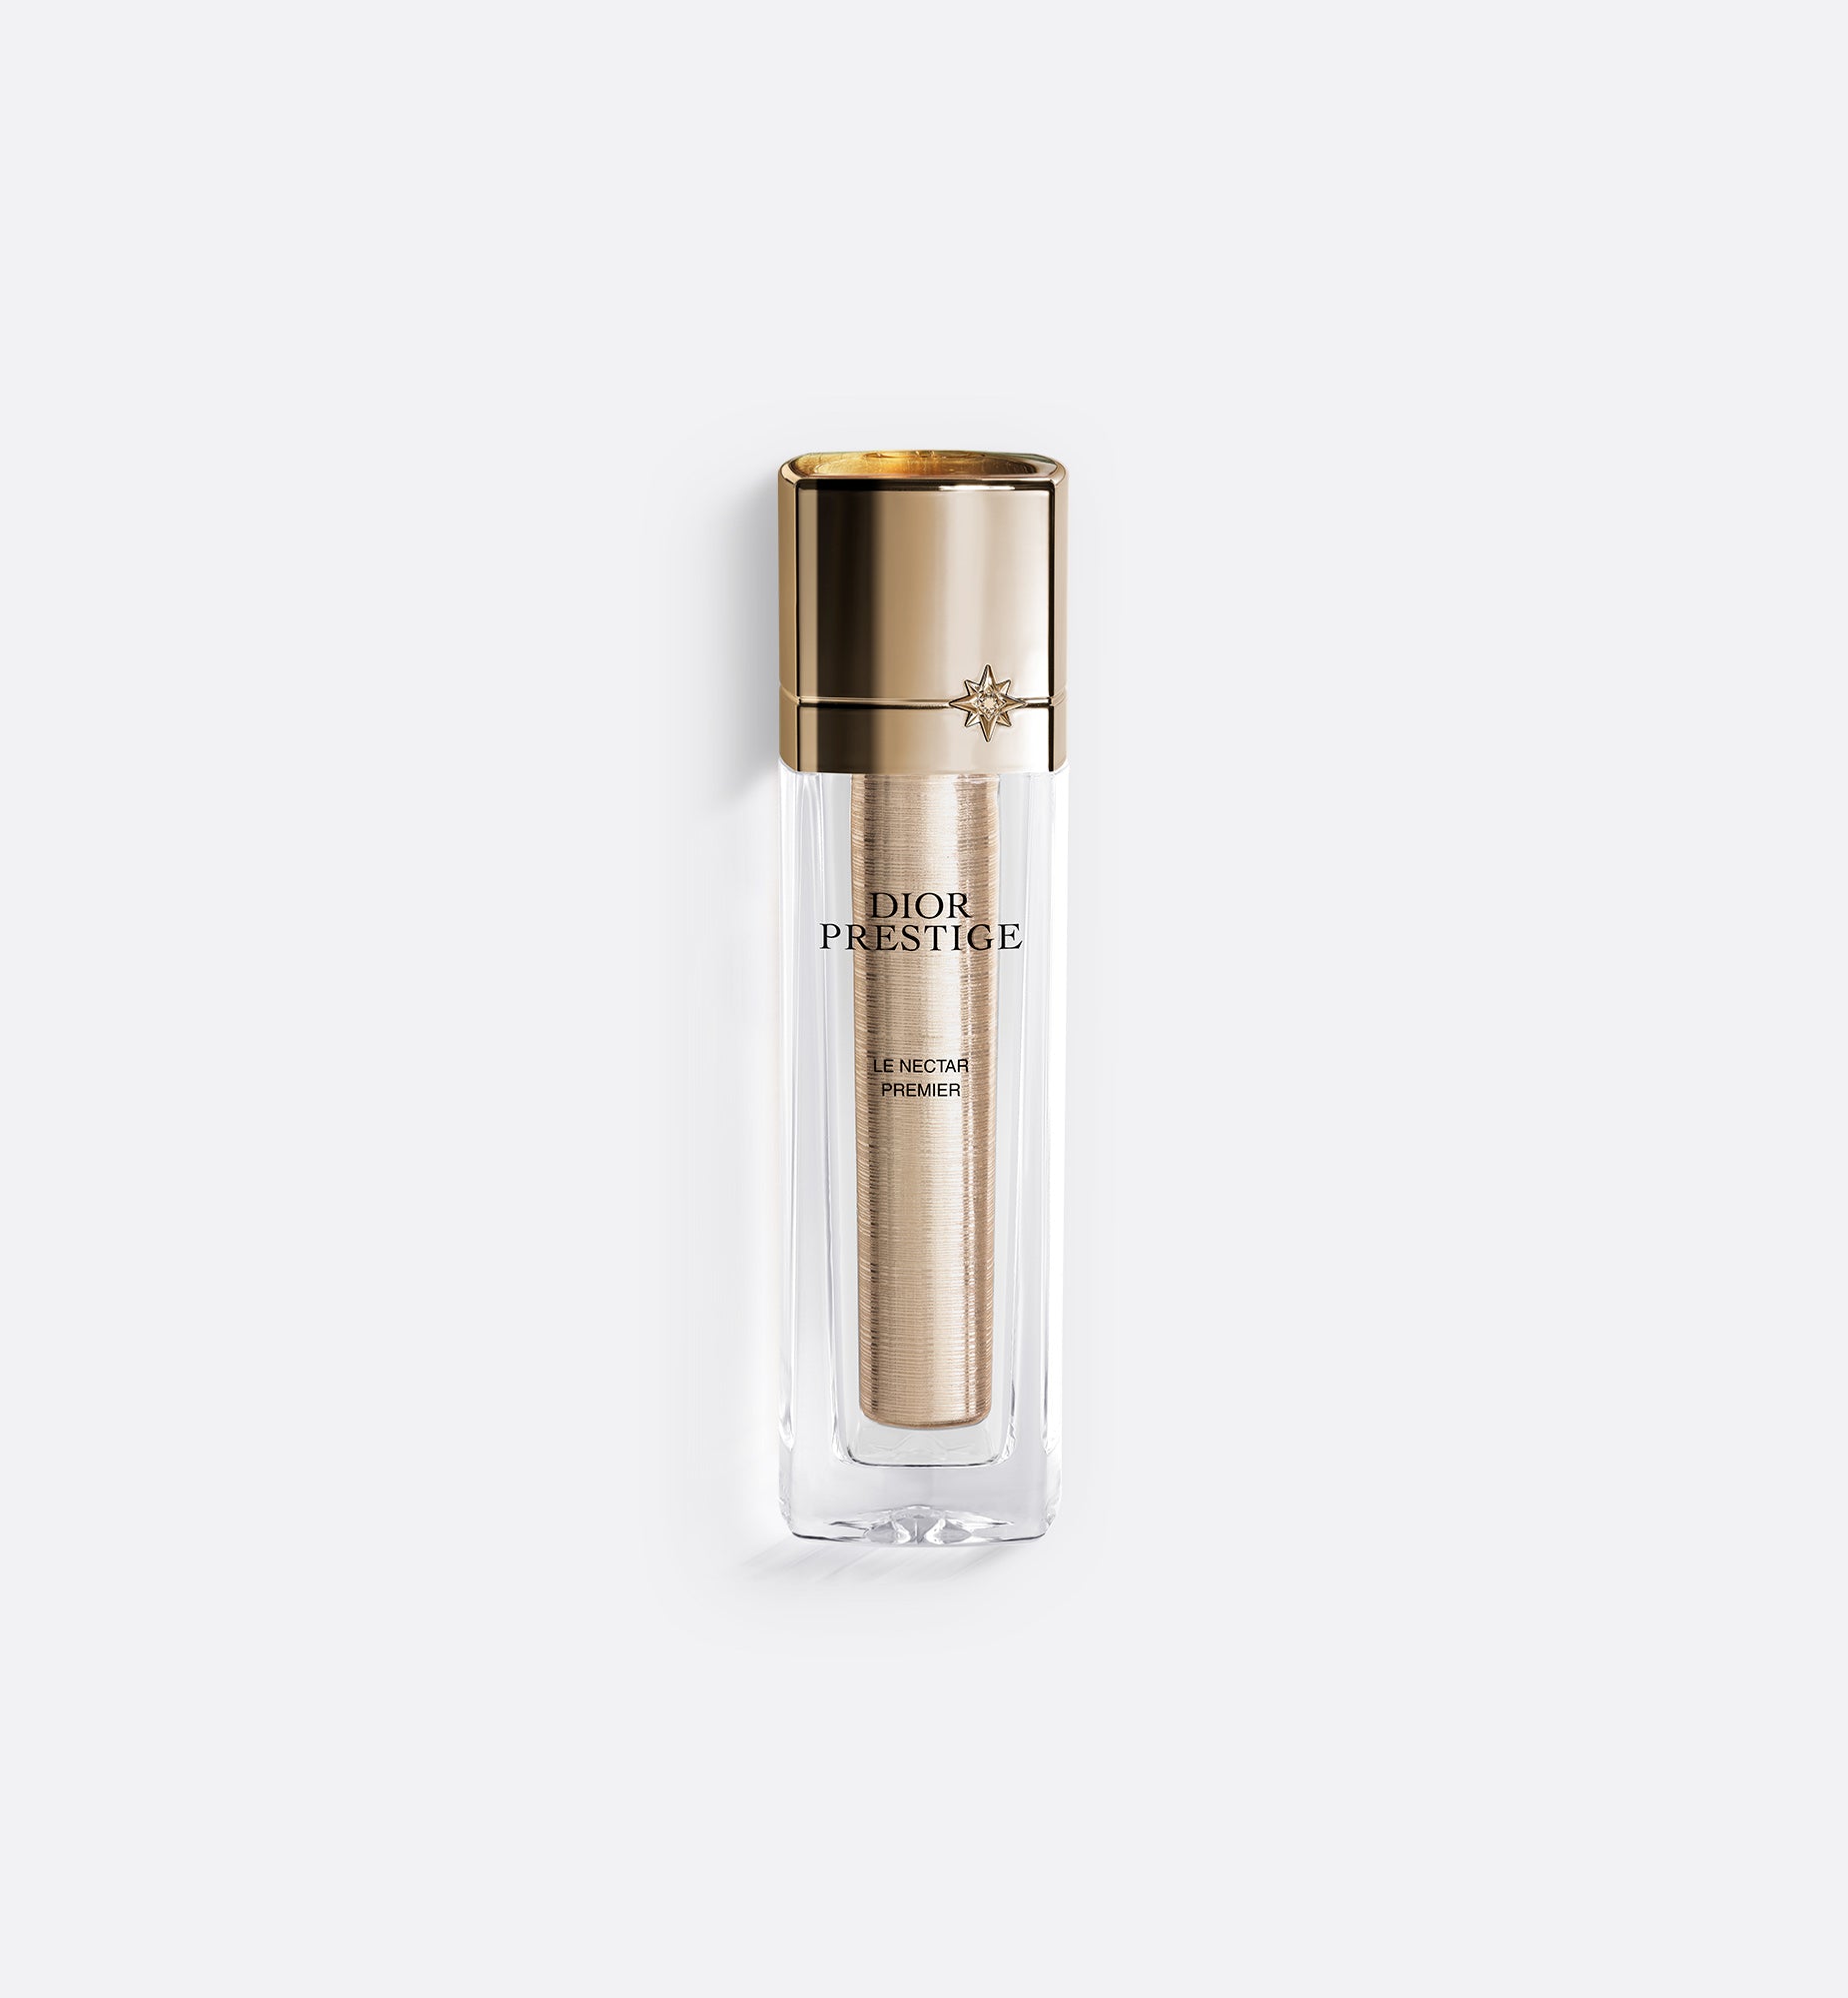 Dior Prestige Le Nectar Premier | Intensive Revitalizing Age-Defying Face and Neck Serum - Enhances, Densifies and Gives Radiance